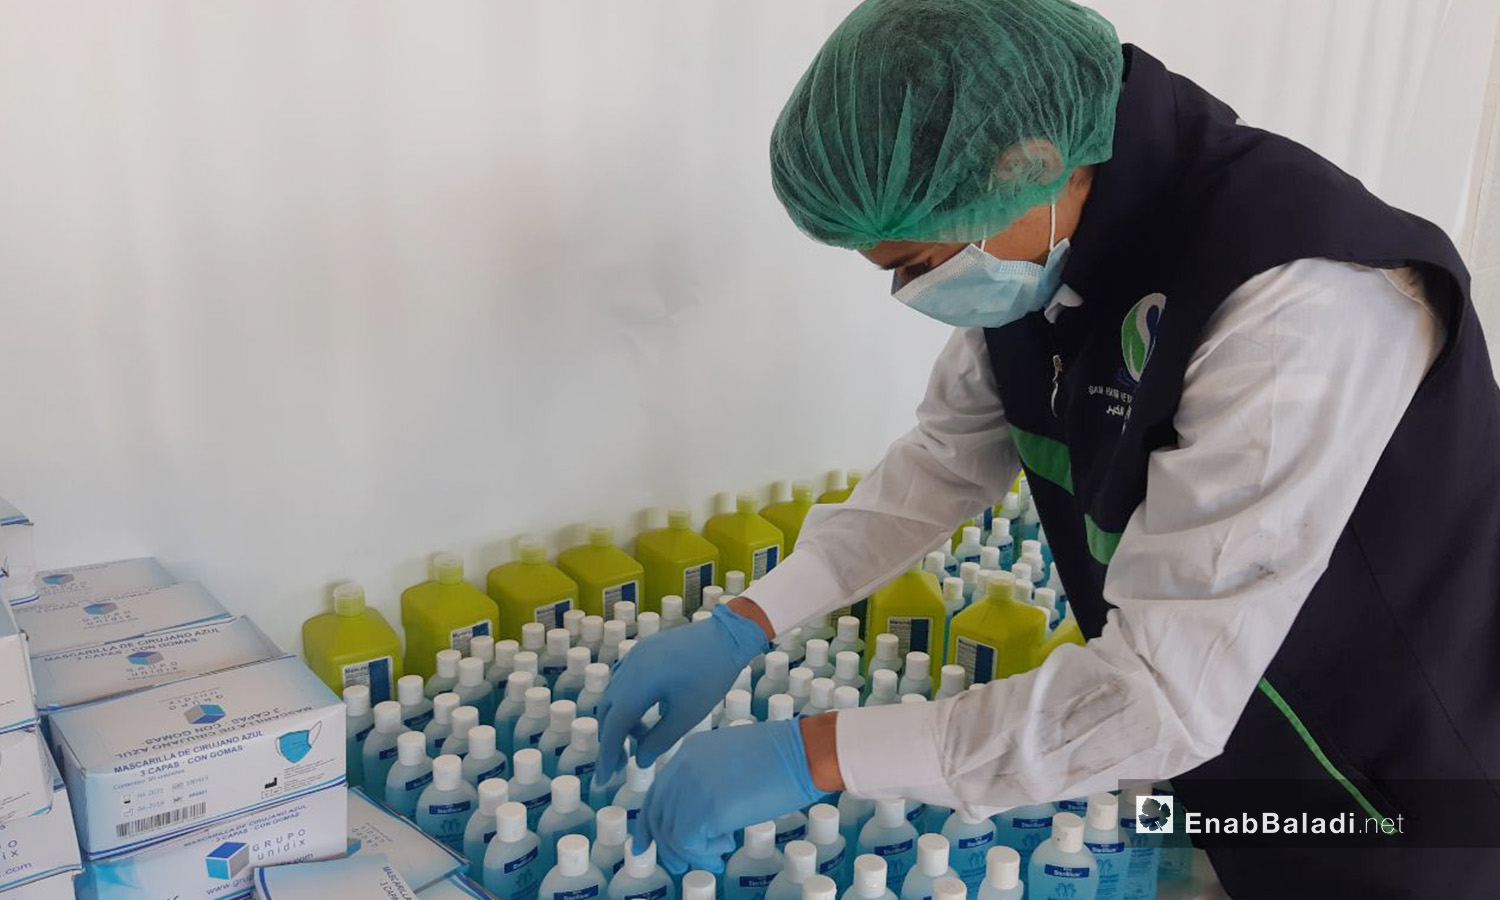 The preparation of sanitizers and disposable medical face masks to distribute them on the doors of some mosques in northern Idlib countryside as a preventive measure against a further spread of the novel coronavirus (COVID-19) pandemic – 07 July 2020 (Enab Baladi / Iyad Abdel Jawad)